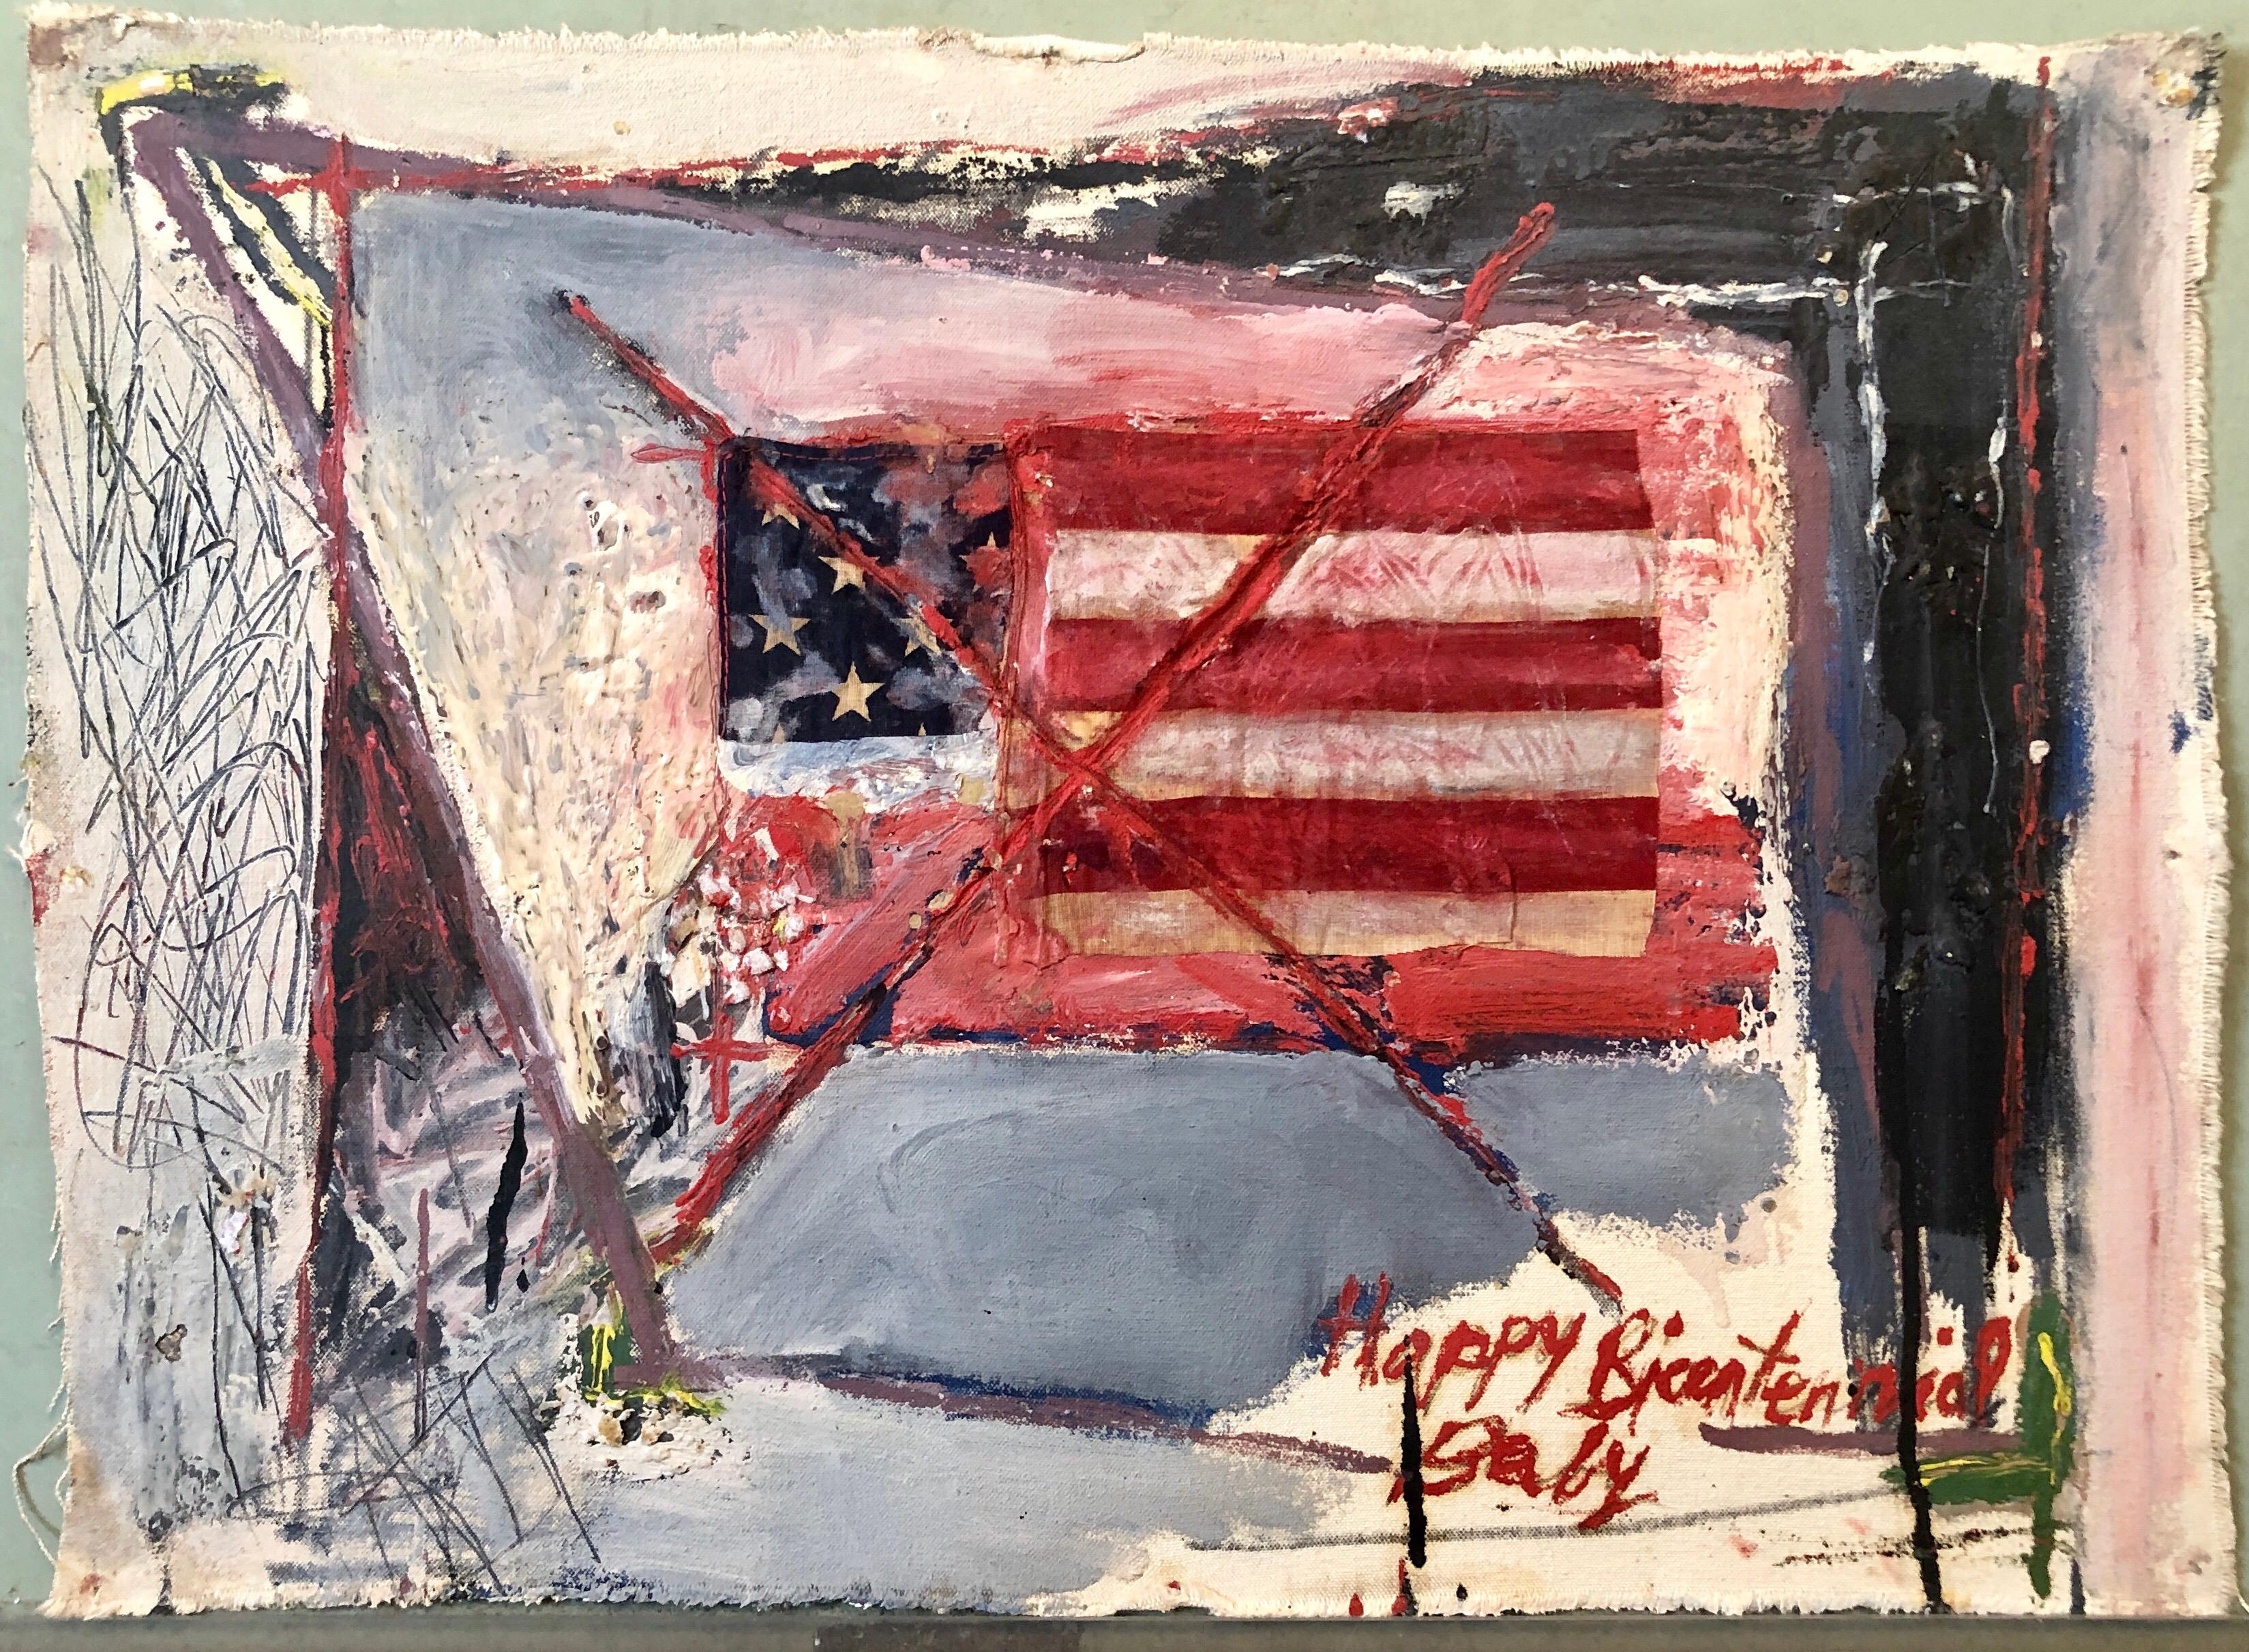 Katherine Porter Abstract Painting - Abstract Expressionist Happy Bicentennial Baby, American Flag Collage Painting